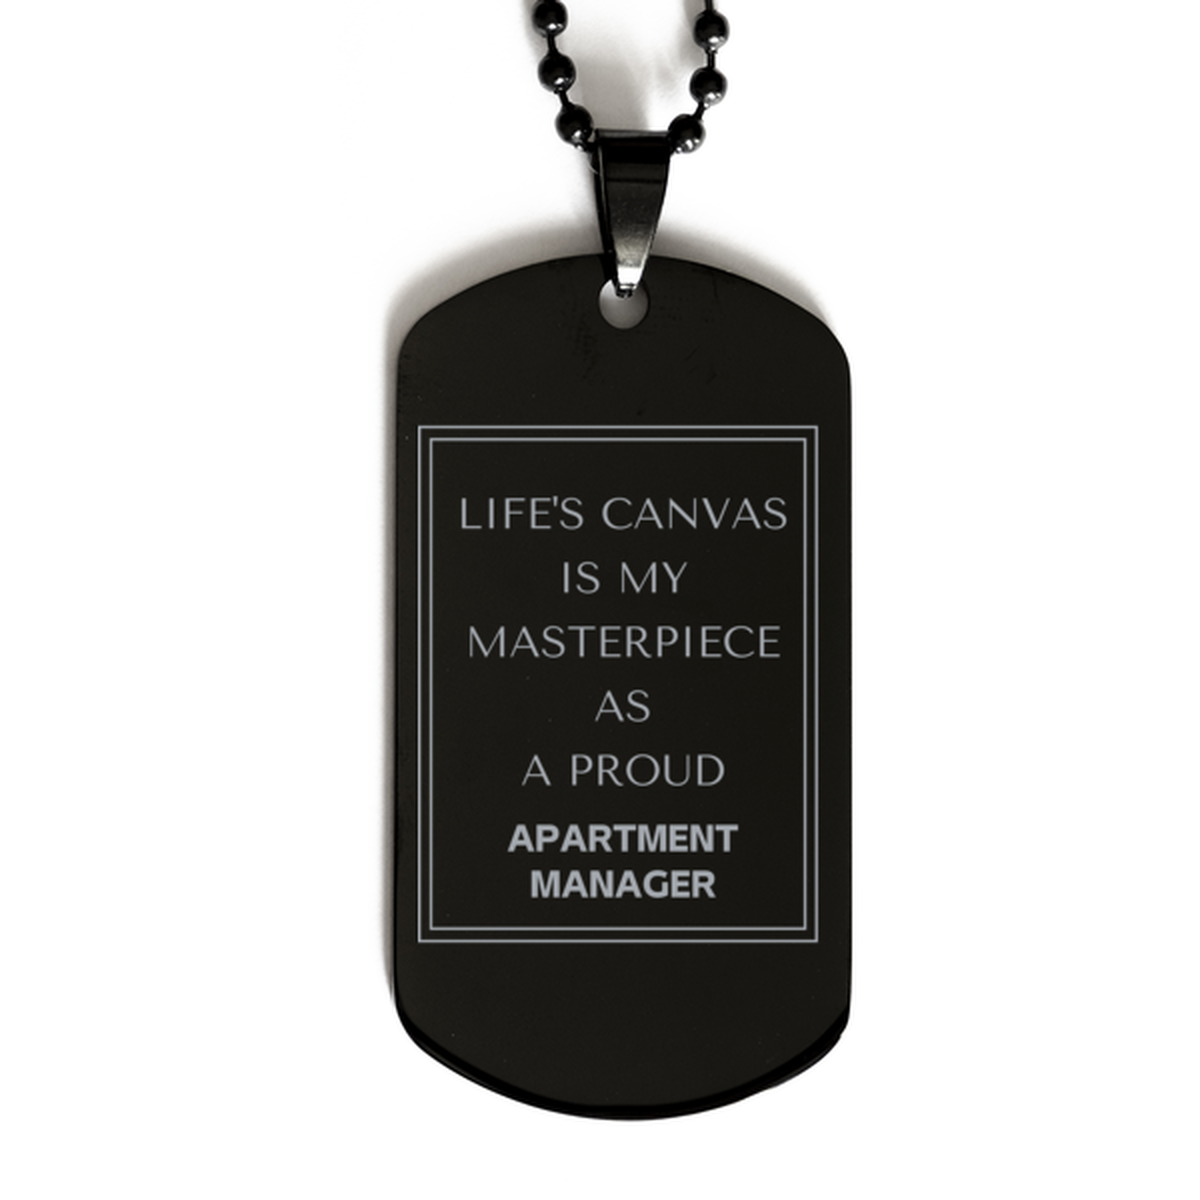 Proud Apartment Manager Gifts, Life's canvas is my masterpiece, Epic Birthday Christmas Unique Black Dog Tag For Apartment Manager, Coworkers, Men, Women, Friends